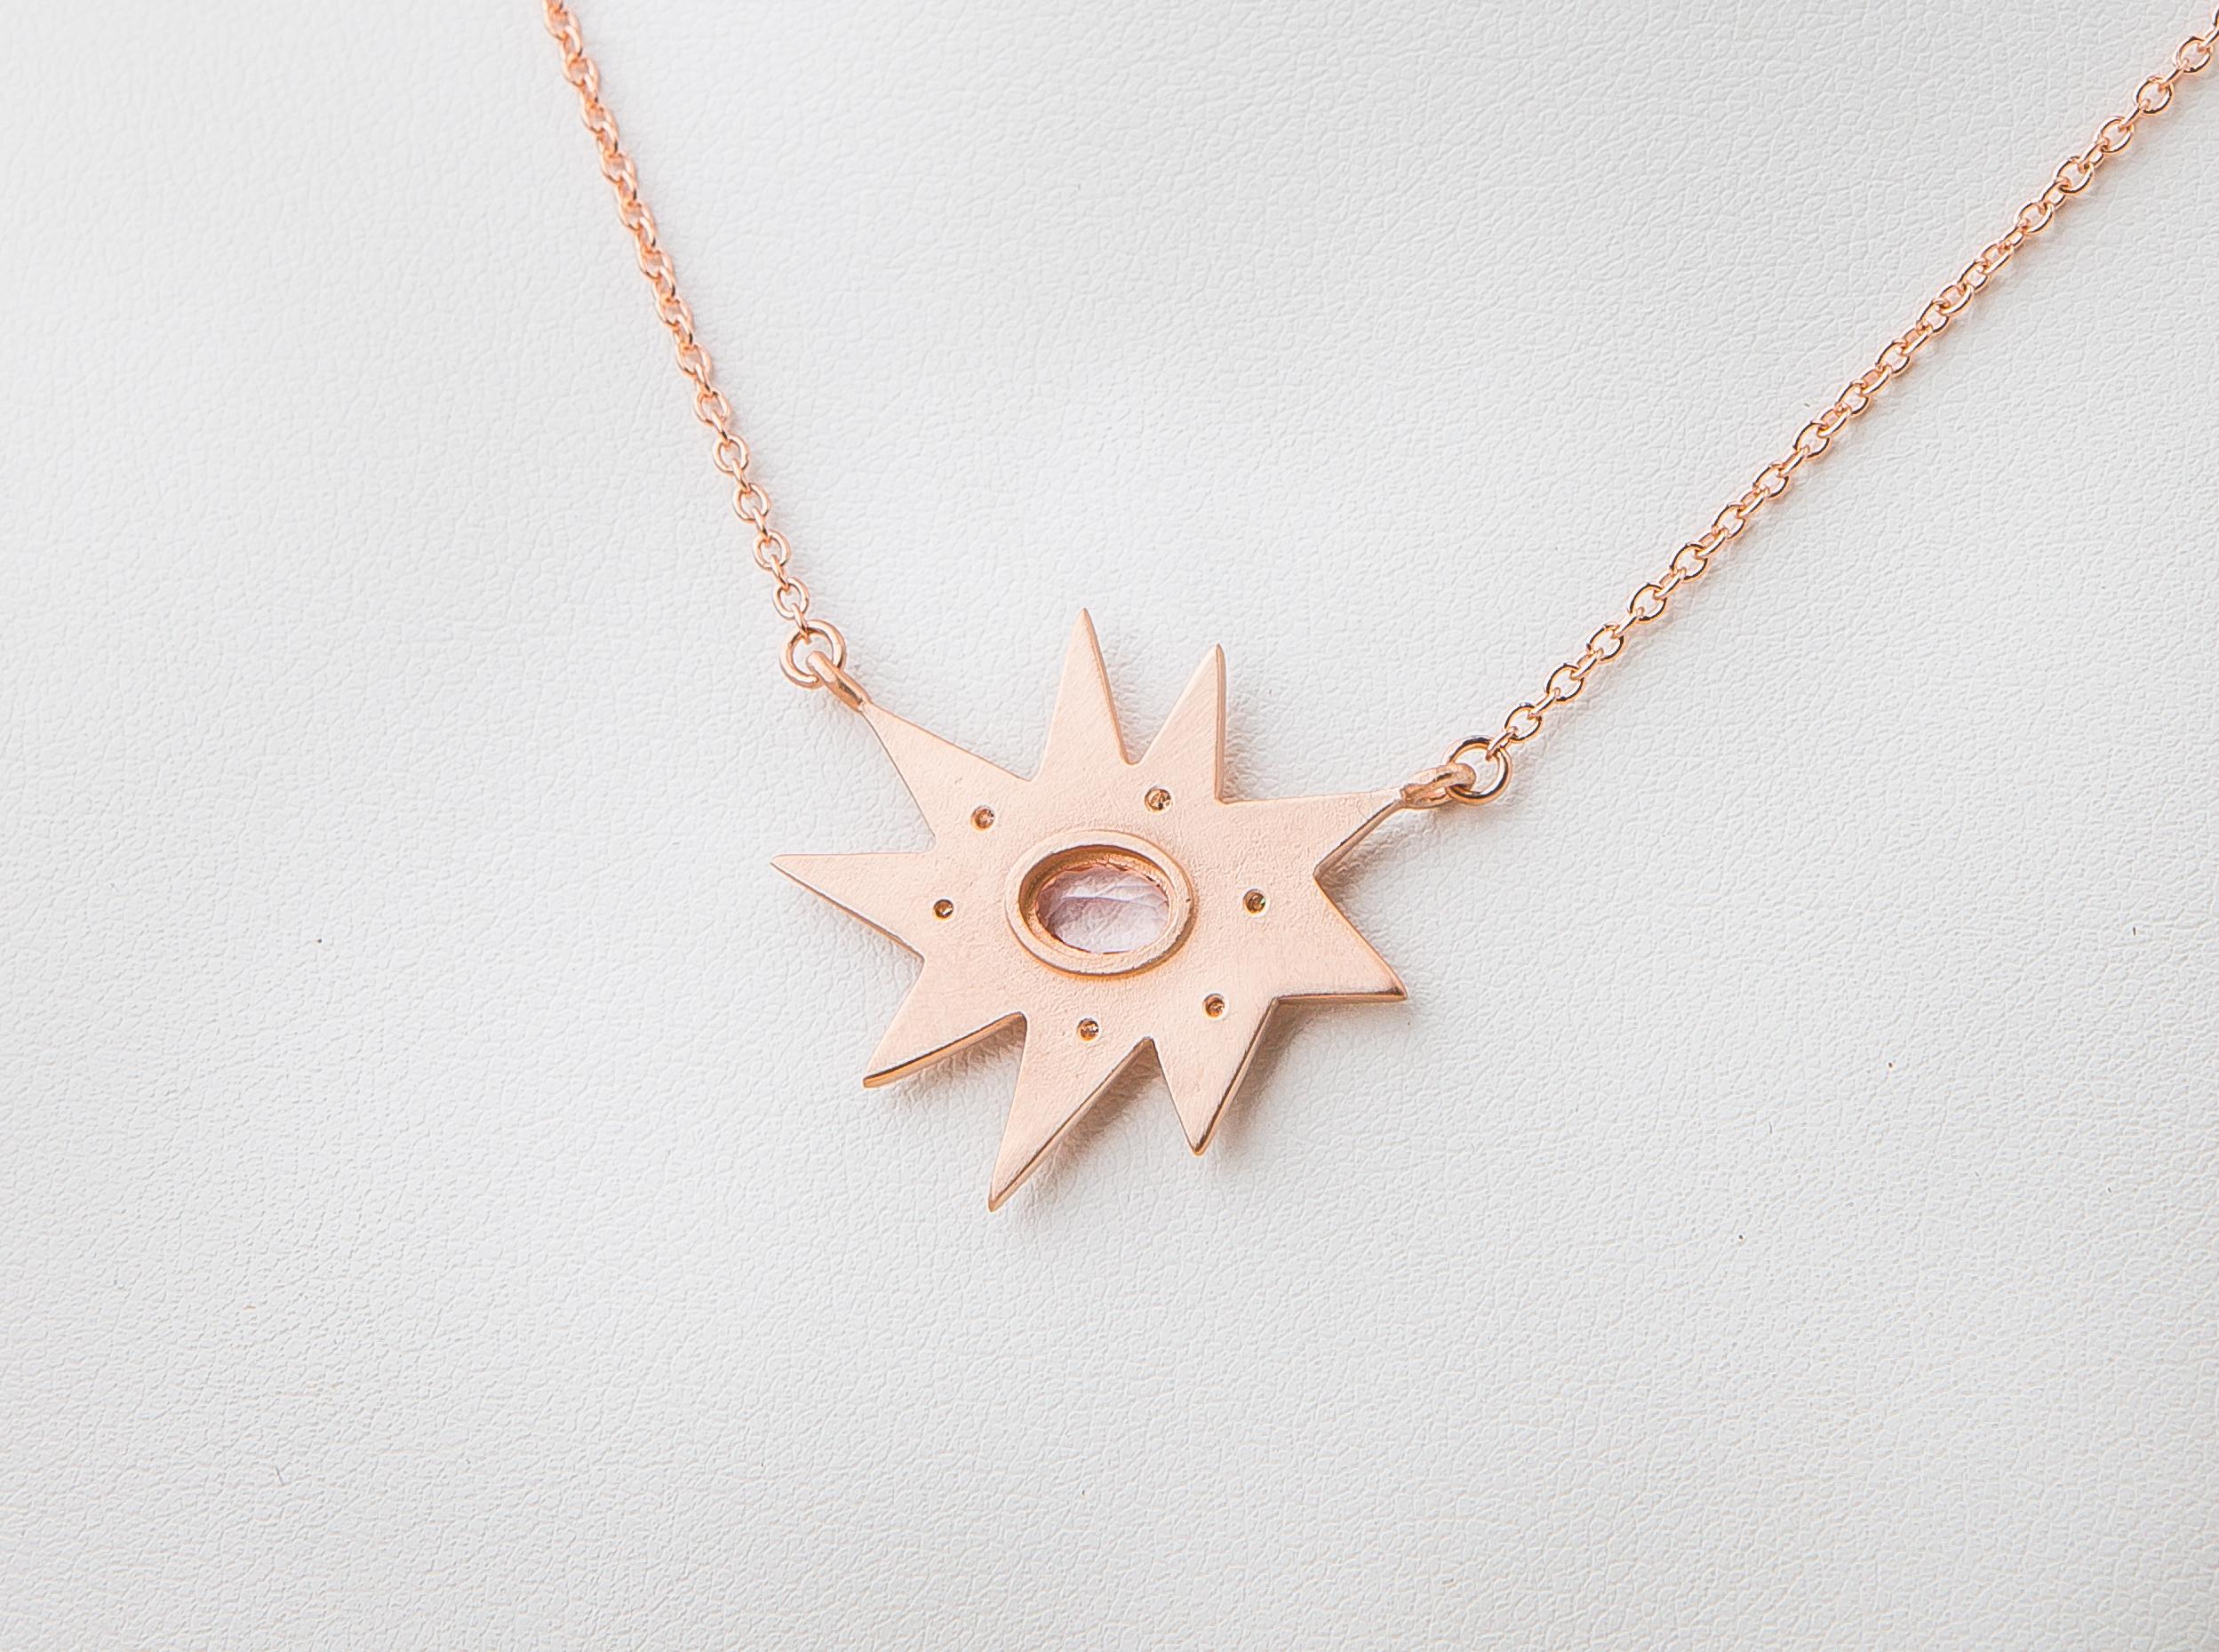 Classic and stunning. Our iconic matte rose gold organic star shape Stella necklace features our signature diamond dusting and a dazzling morganite center. Hanging on a substantial rose gold chain, this colorful piece is luxe and weighty. 

KAPOW!